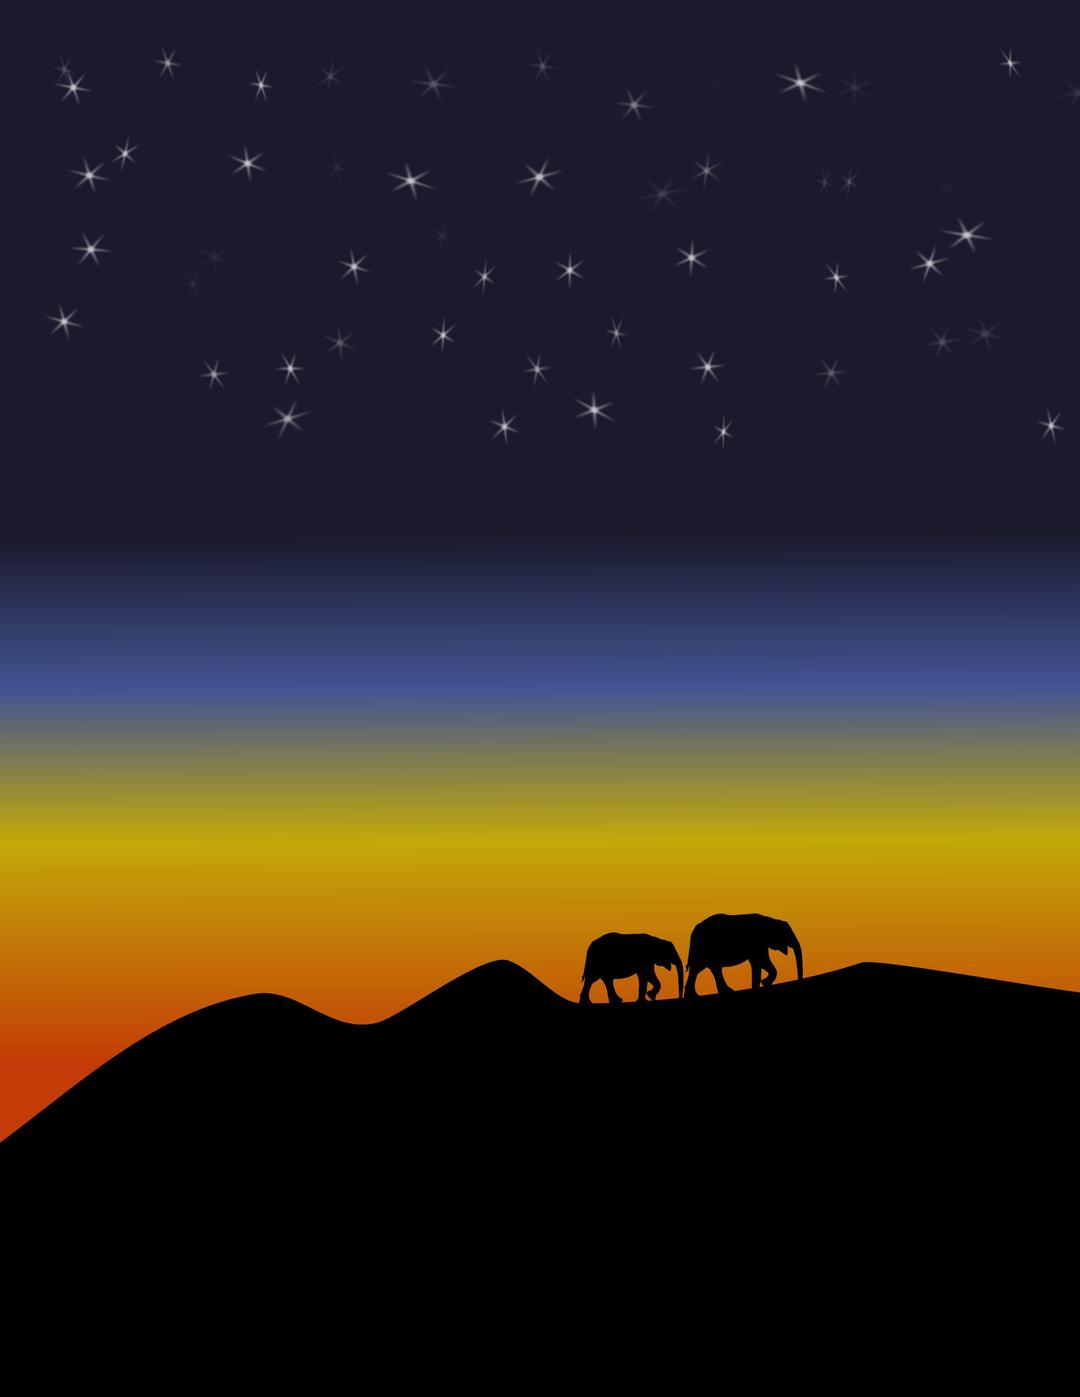 Sunset with stars png transparent